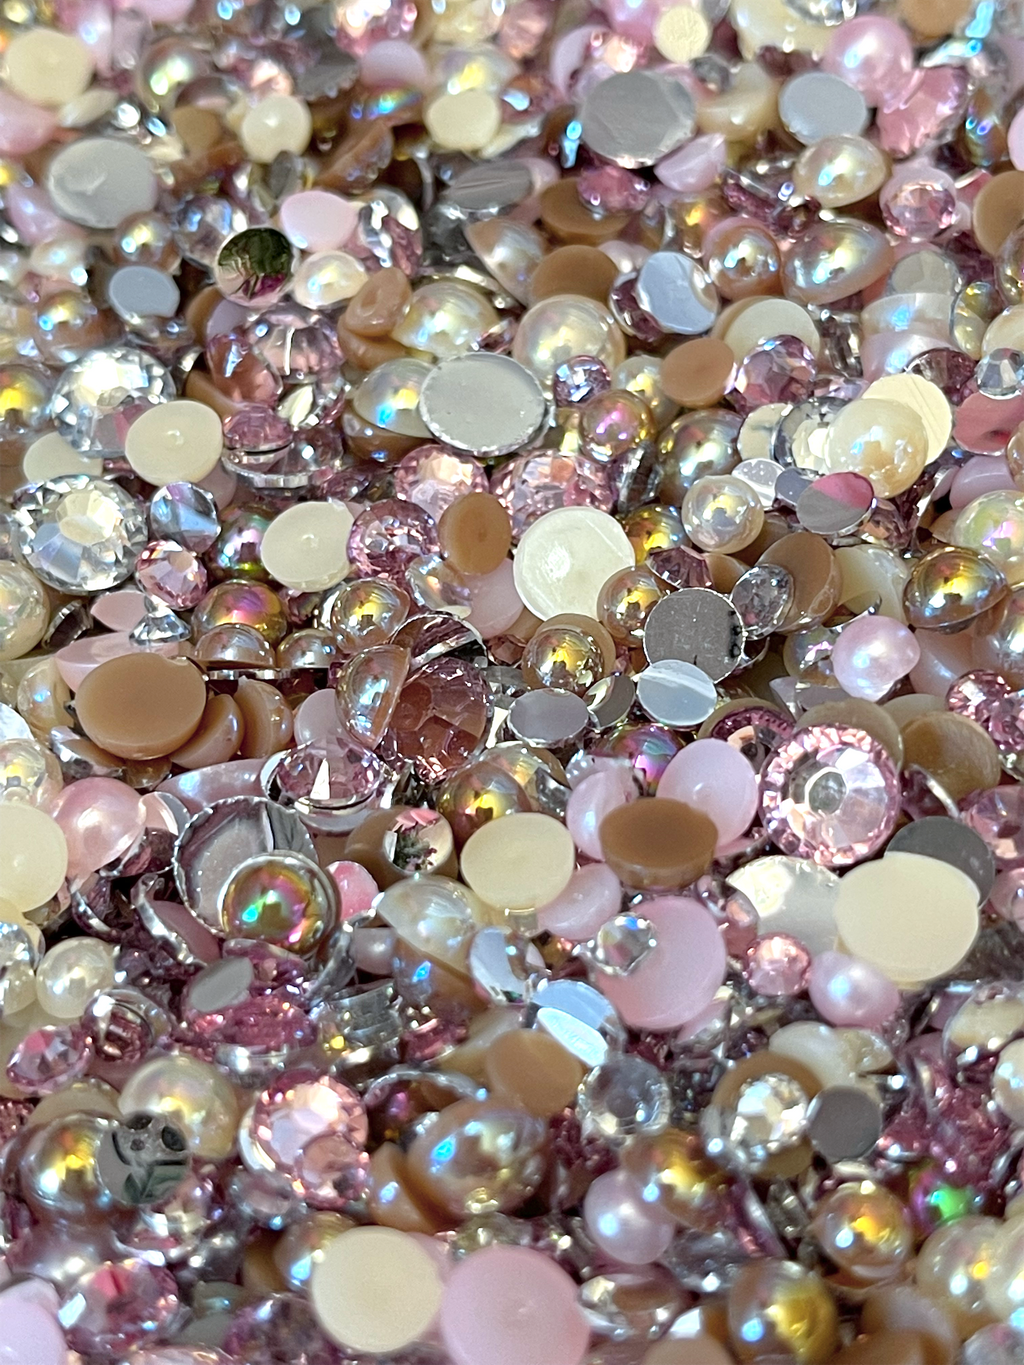 Candy Cane Pearl Mix, Flatback Pearls and Rhinestone Mix, Sizes Range  3MM-10MM, Flatback Jelly Resin, Faux Pearls Mix